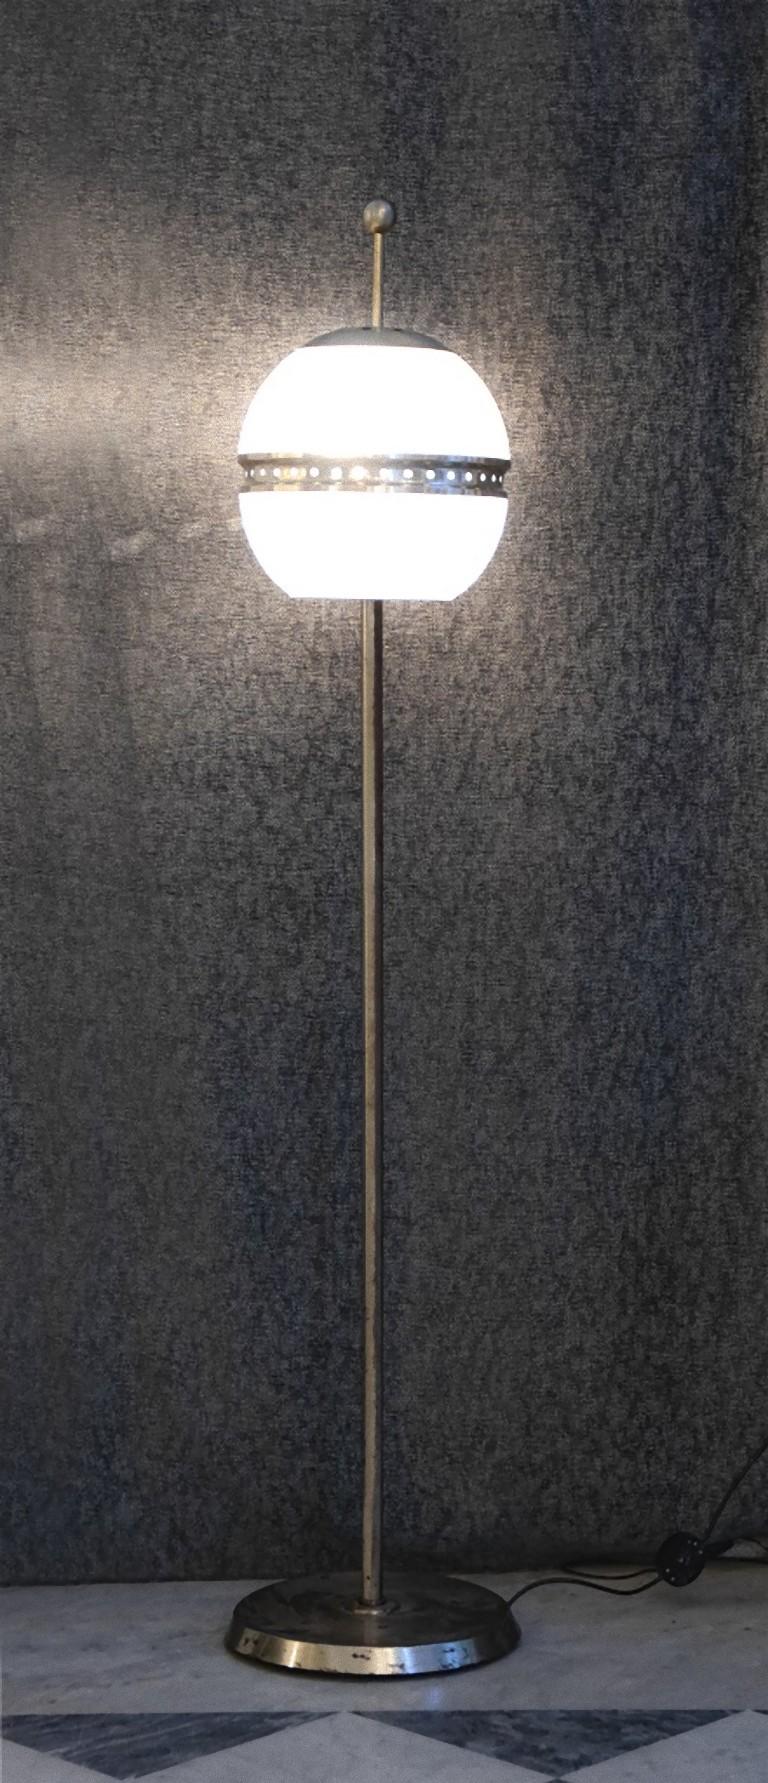 Chiaravallotti floor lamp is an elegant design lamp designed in the half of the 1950s.

Steel and glass.

Created by Chiaravallotti design. Made in Italy.

Excellent conditions.

Chiaravallotti floor lamp, is an excellent work realized in the half